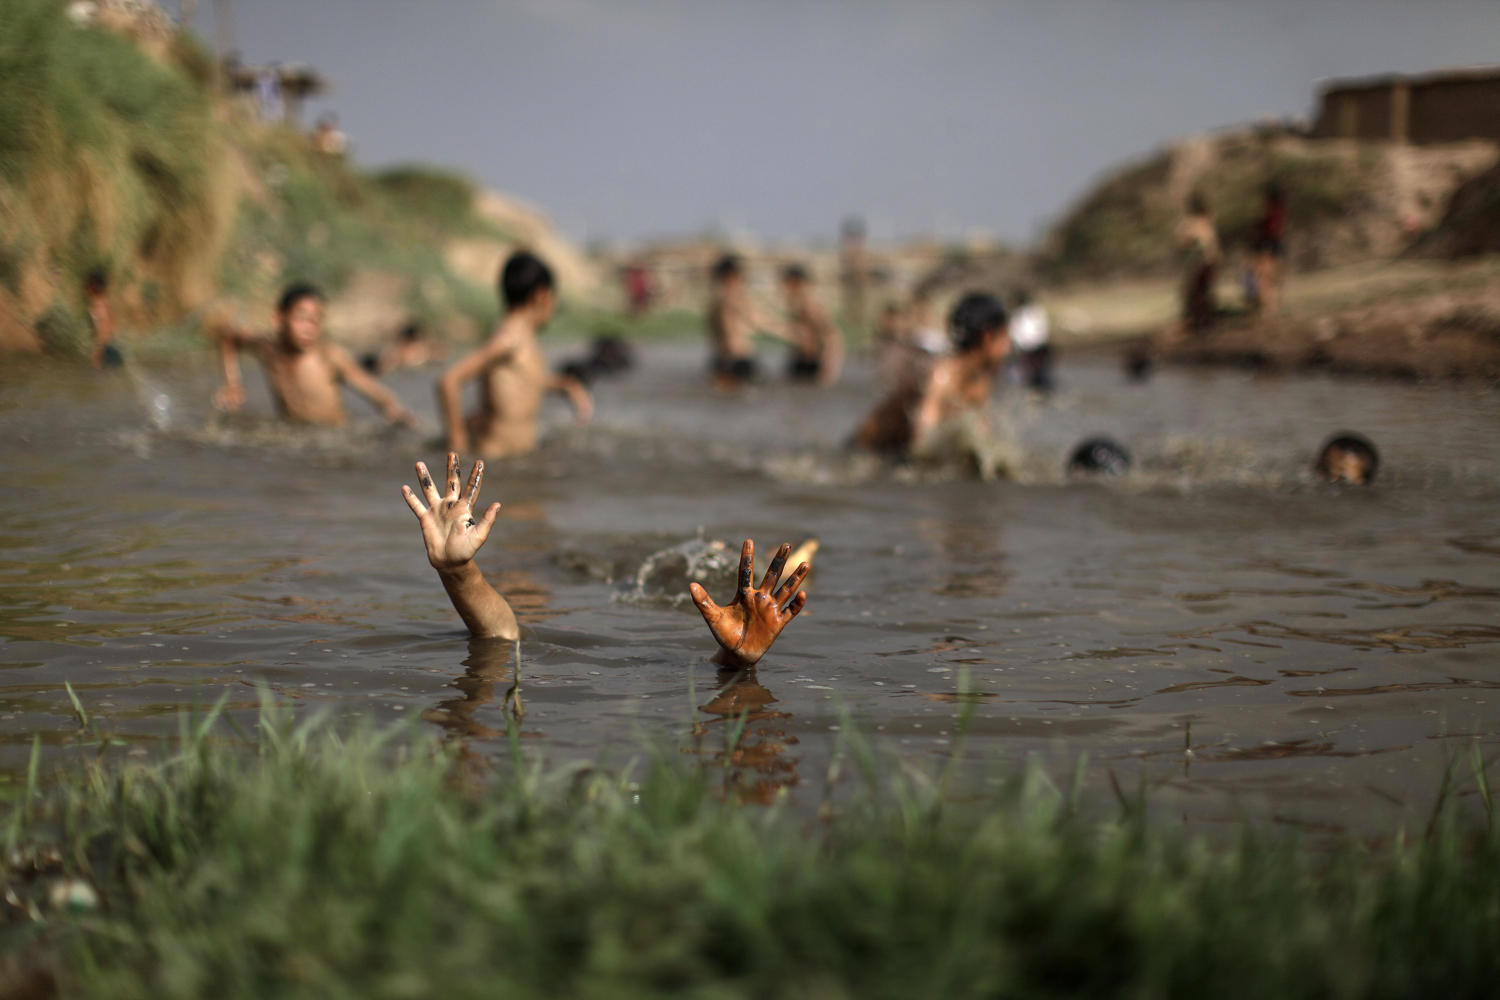 June 5, 2012. An Afghan refugee soaks in a polluted a stream to beat the heat on World Environment Day, in a slum area on the outskirts of Islamabad.